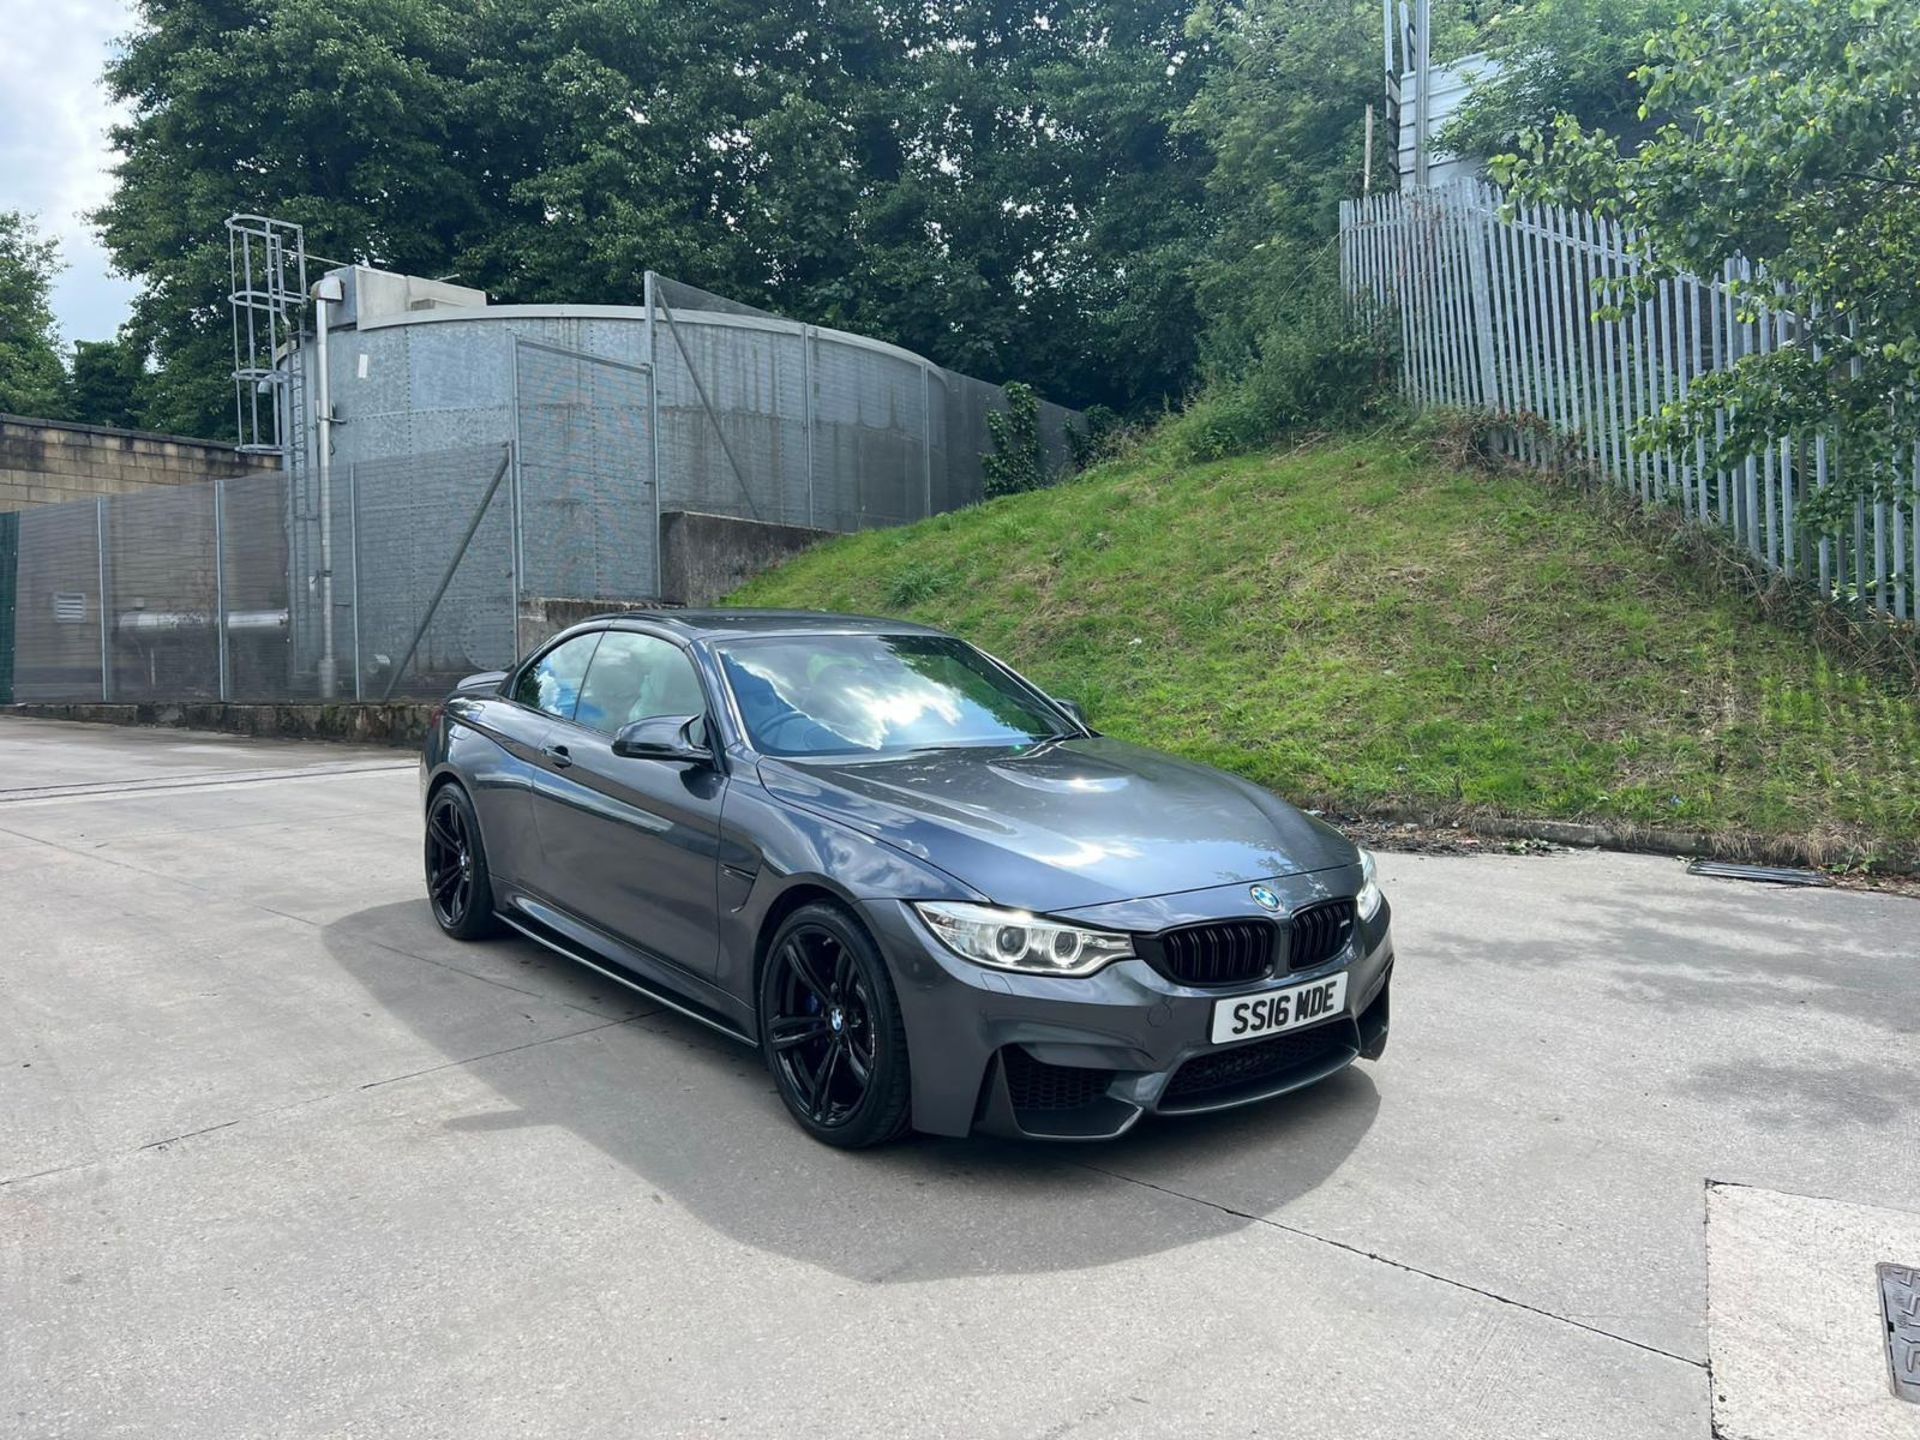 **(ONLY 55K MILEAGE)** 2016 BMW 4 SERIES: BLACK LEATHER INTERIOR (NO VAT ON HAMMER) - Image 2 of 12